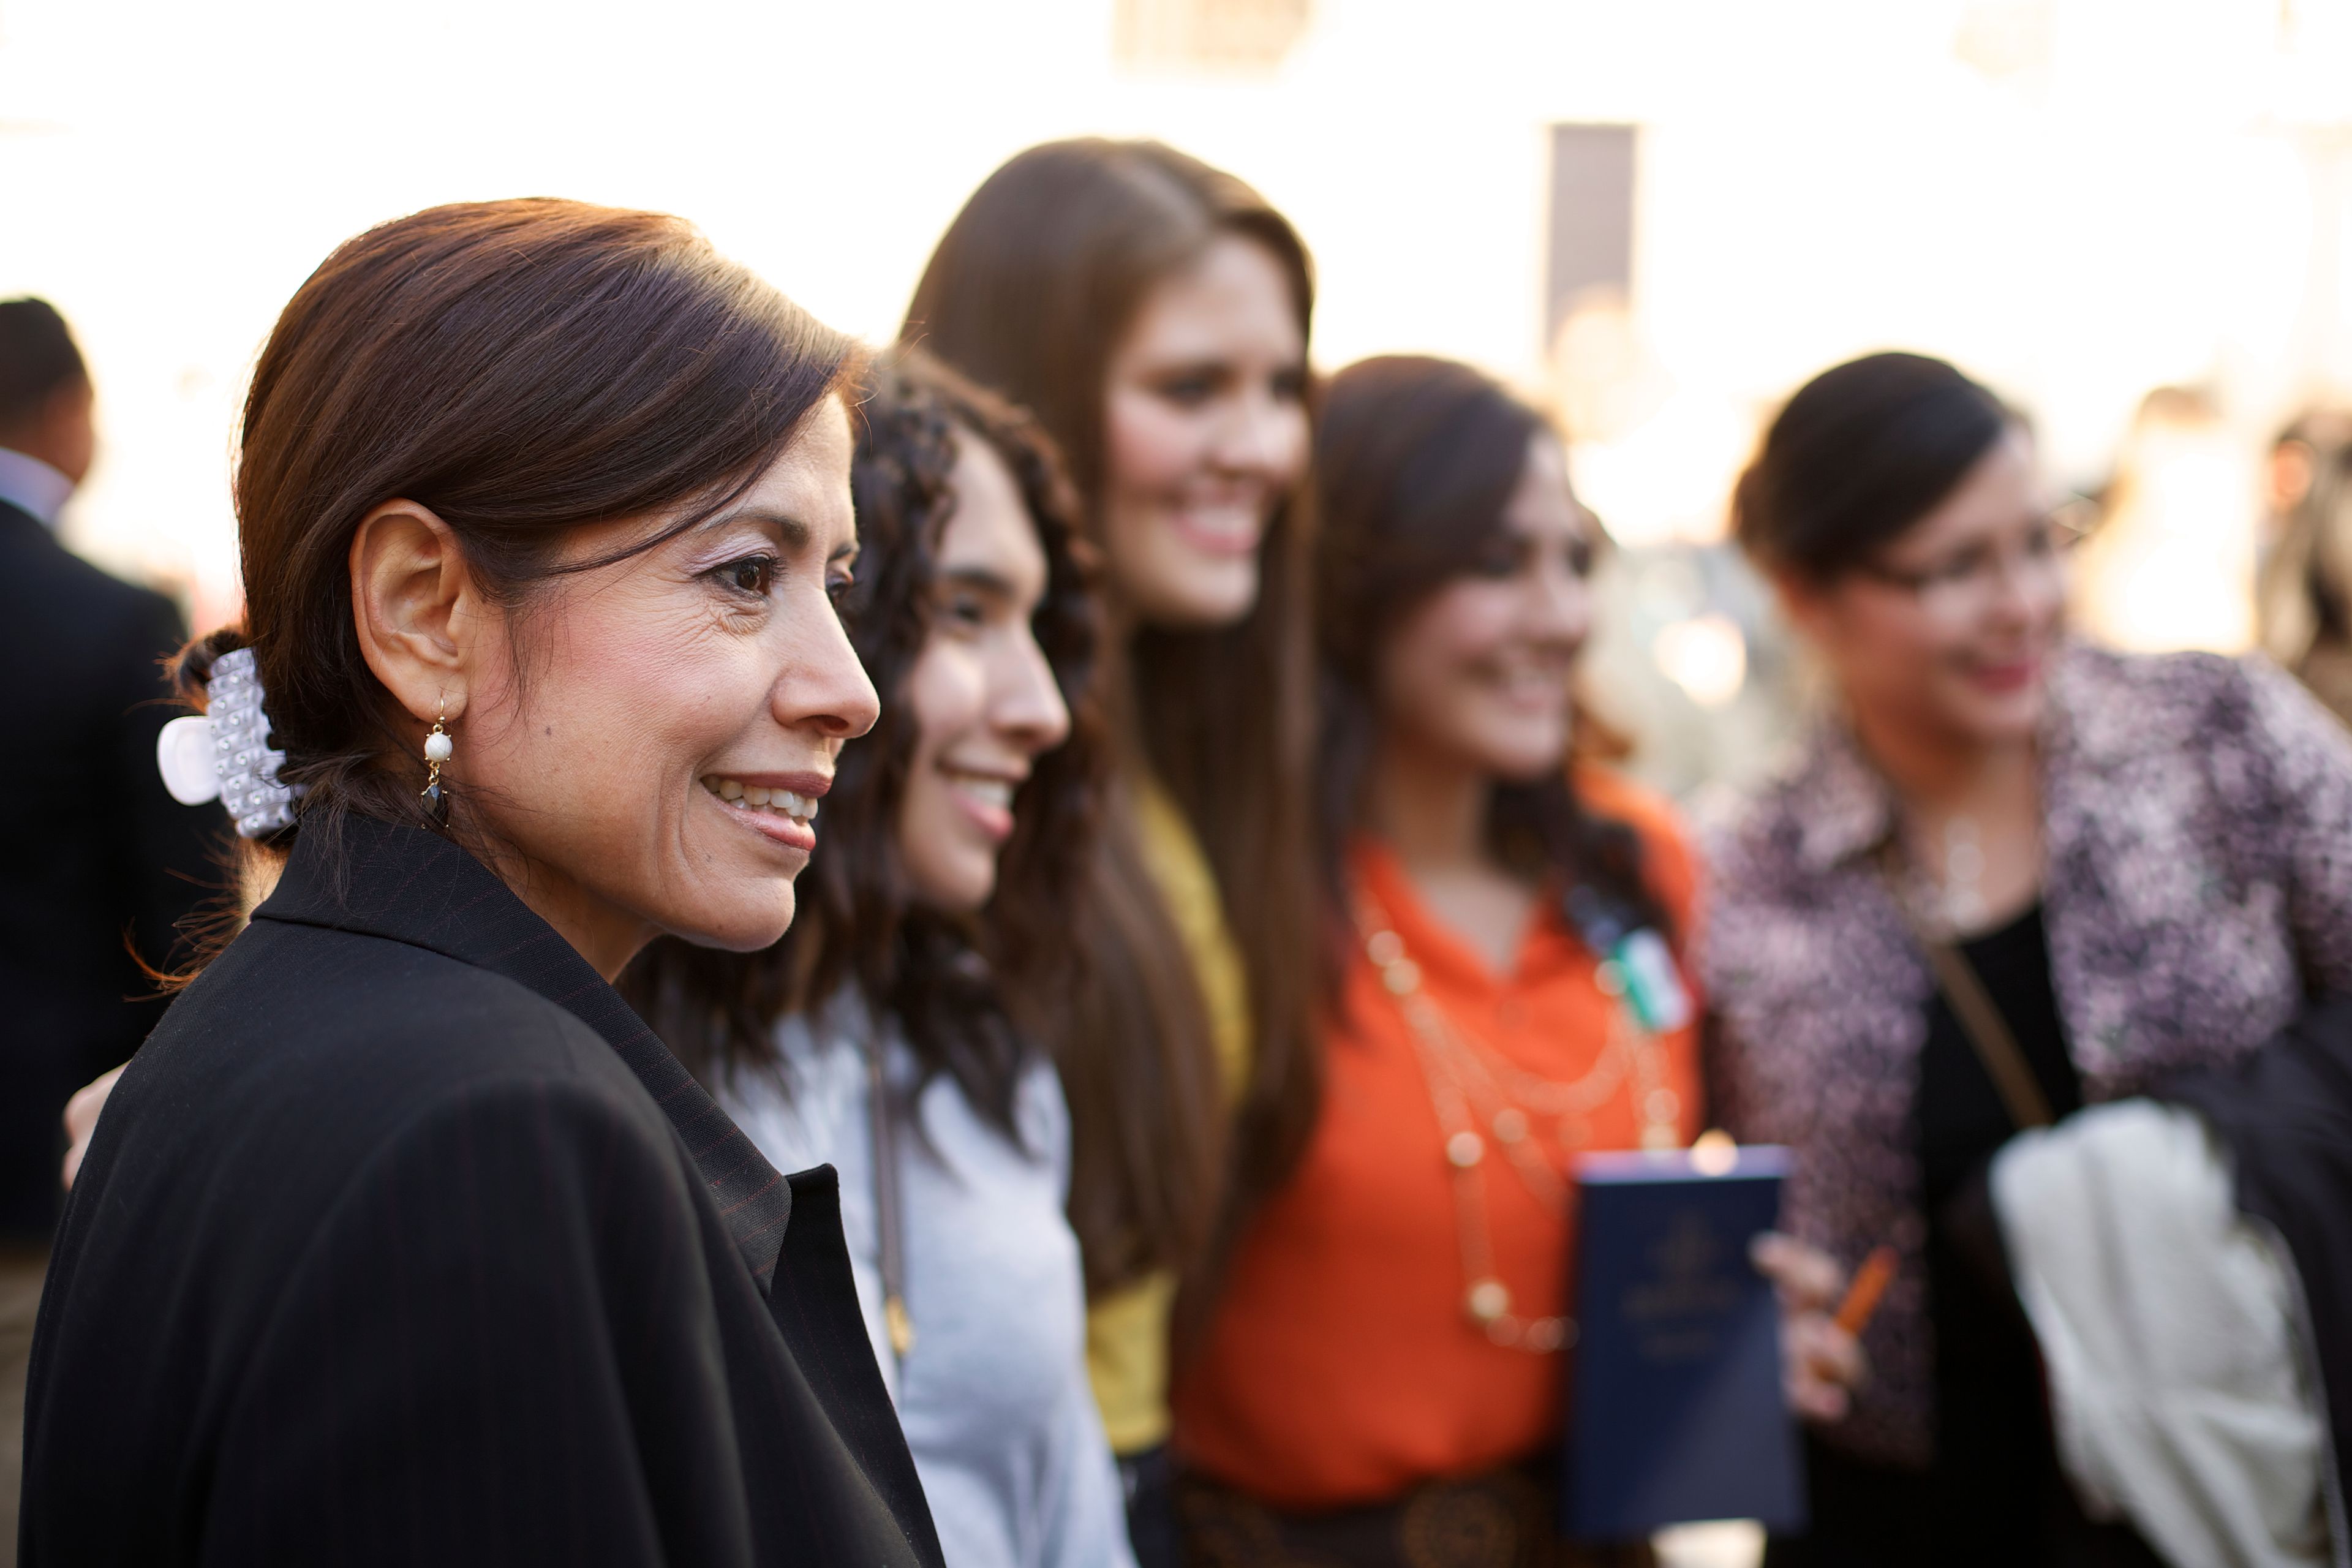 A woman standing in a group with other women outside the Conference Center.  